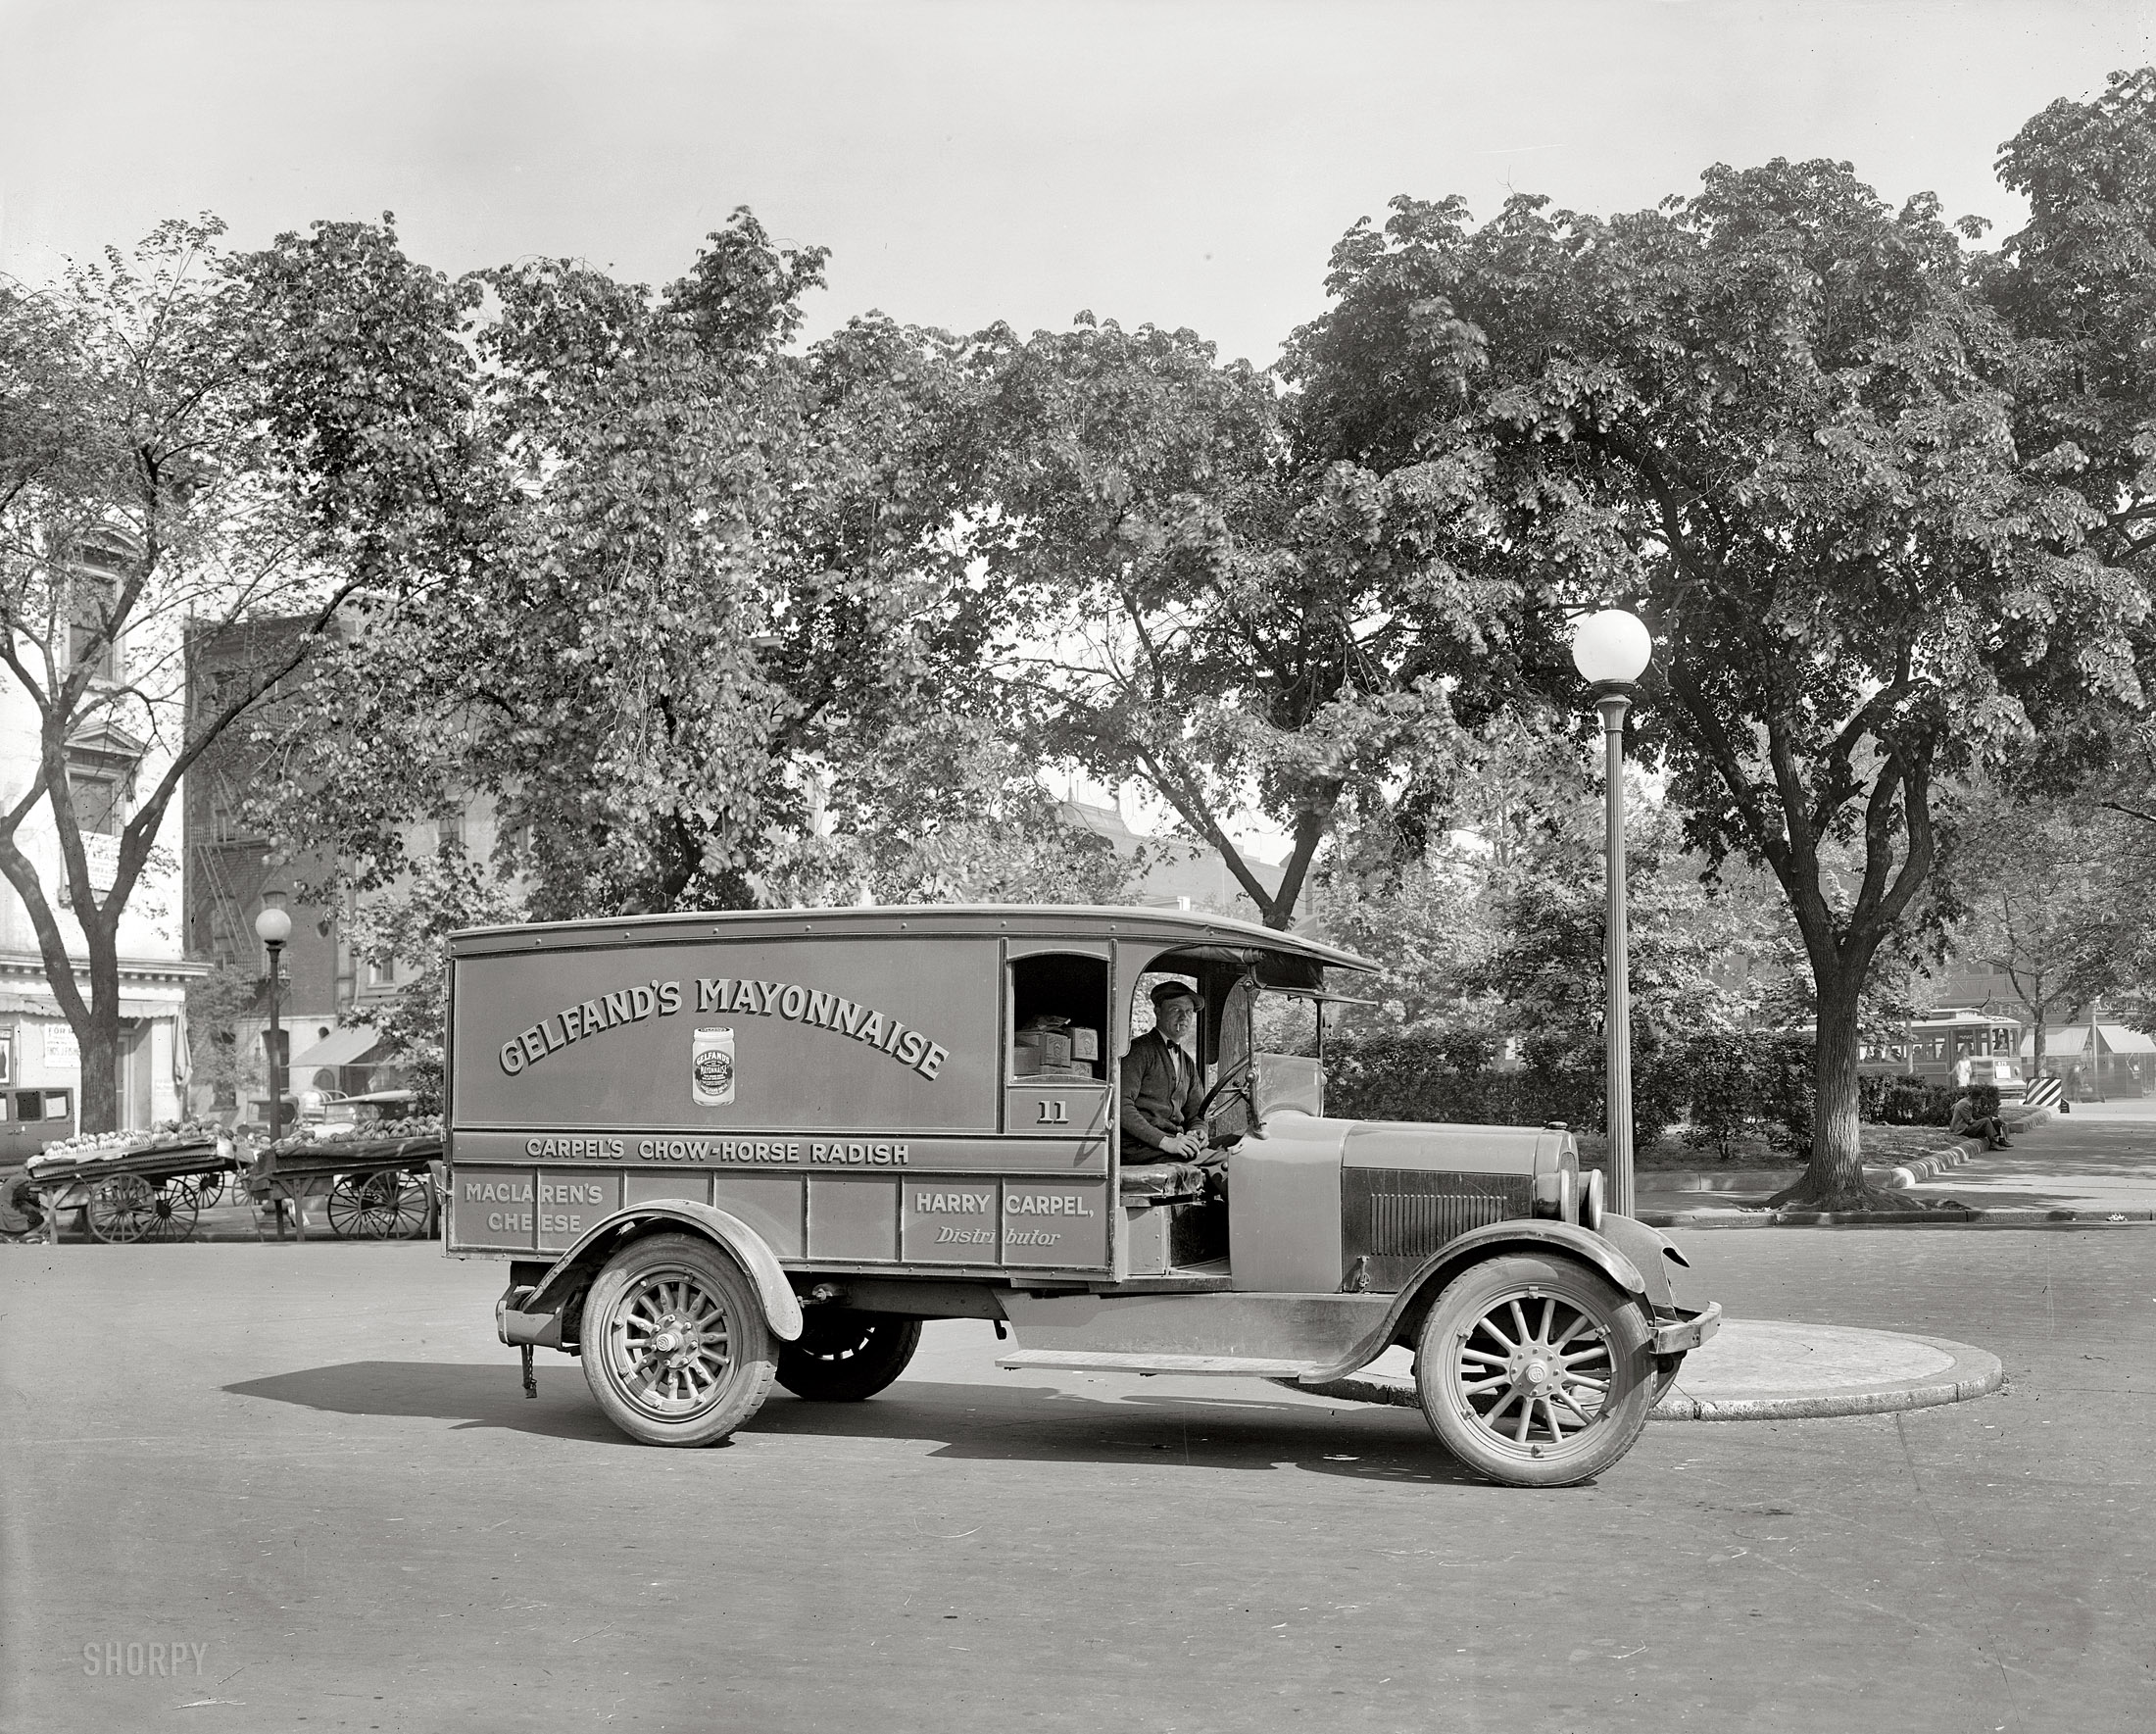 Washington, D.C., circa 1926. "Semmes Motor Co. -- Gelfand's truck." There is of course dignity in all work. But still, I'm glad I don't have to tell people that "I drive the mayonnaise wagon." National Photo glass negative. View full size.